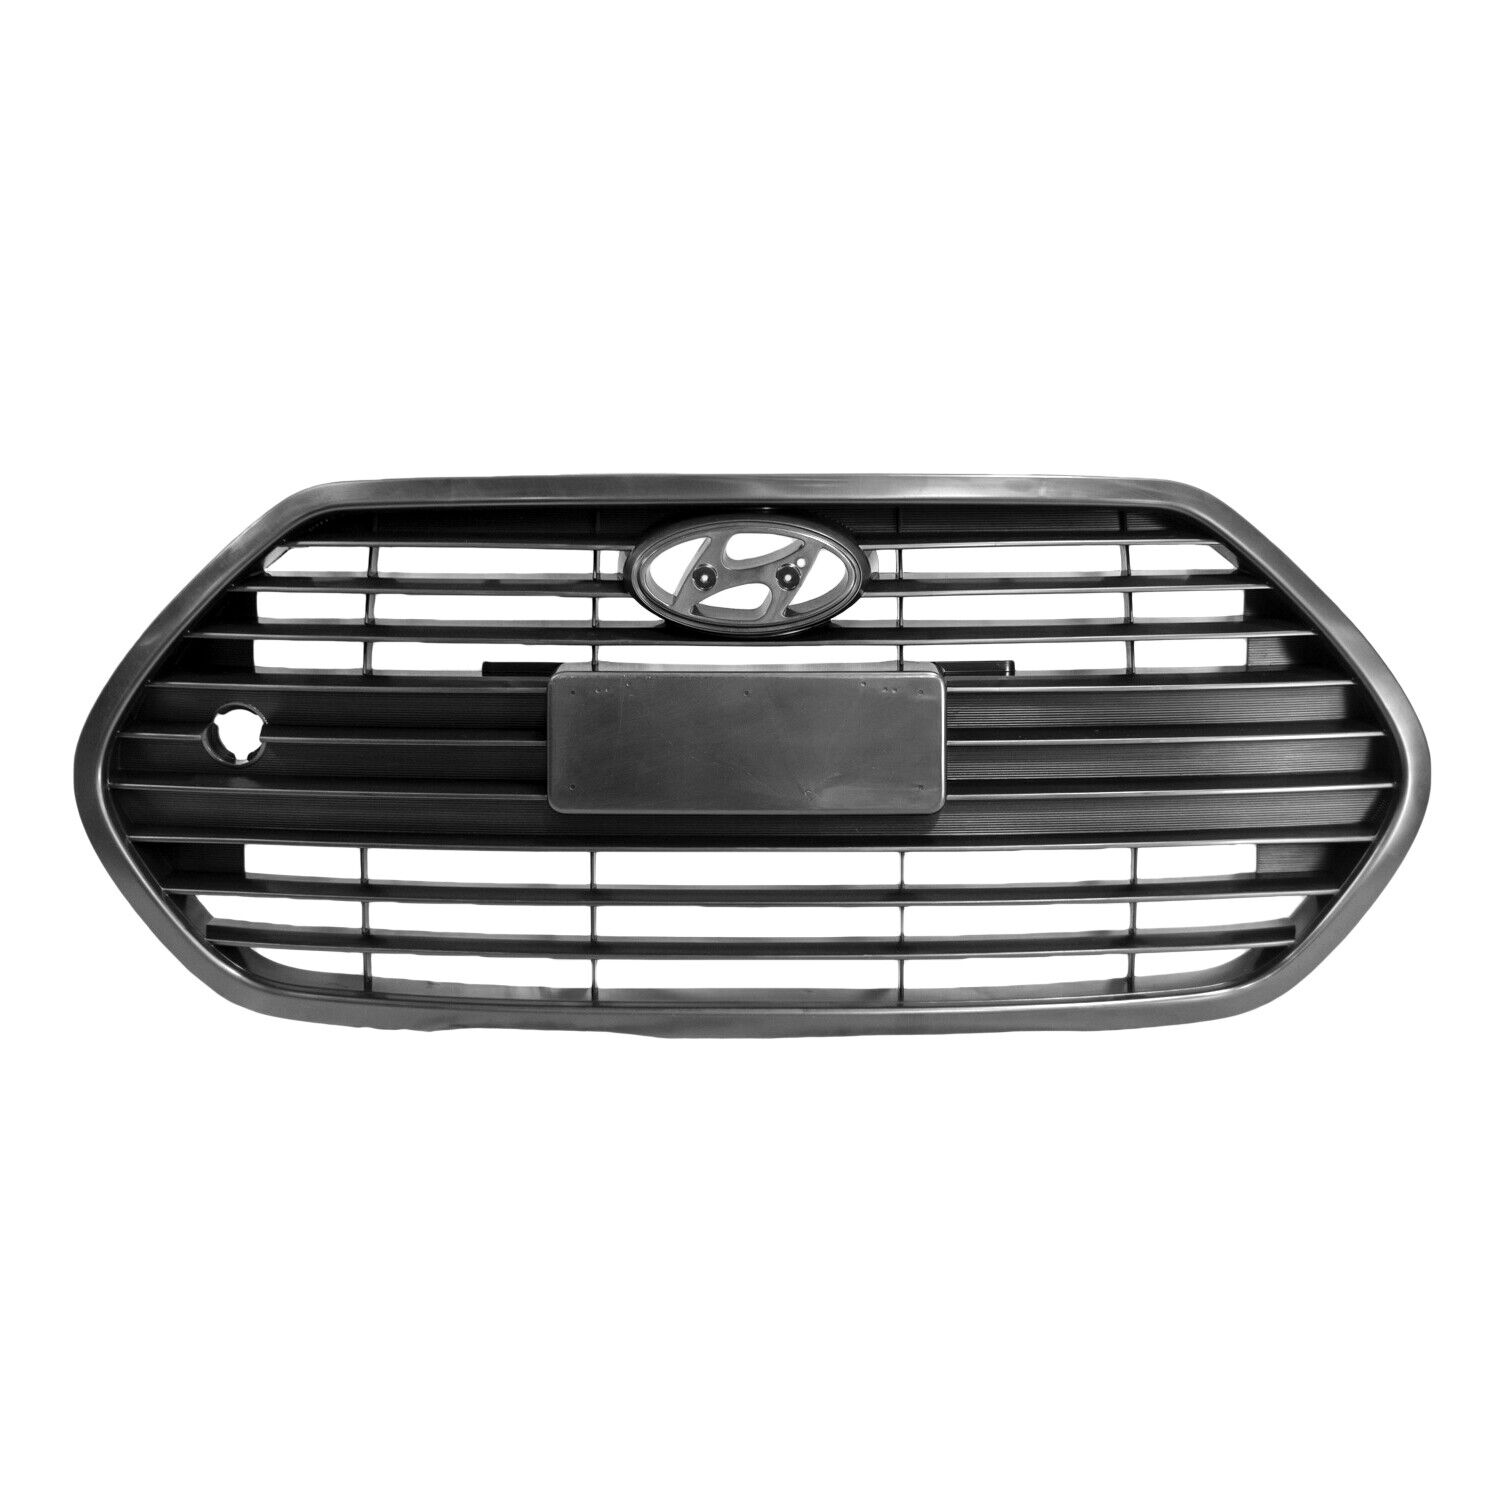 New OEM Front Grille Fits 2013-2017 Hyundai Veloster 104-59638